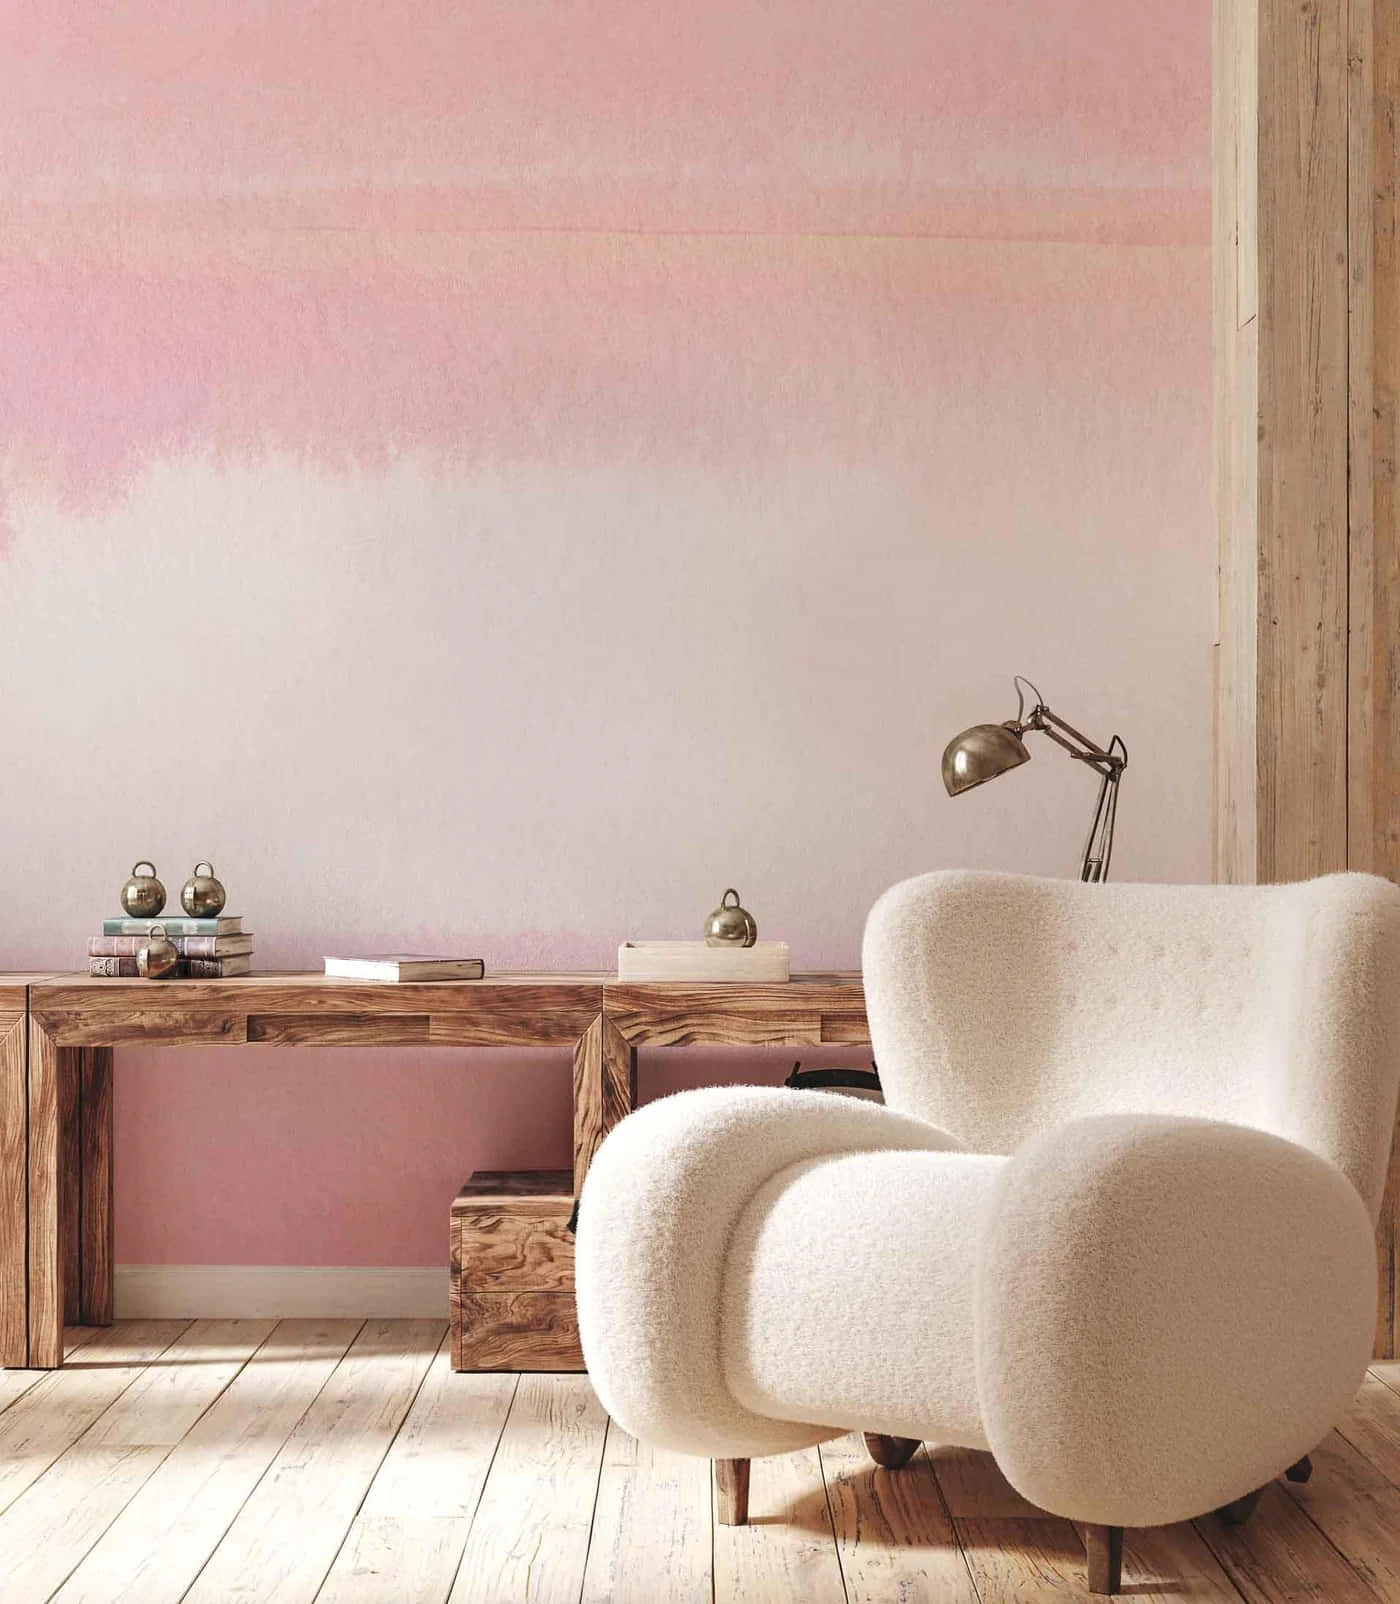 Modern Cozy Interiorwith Pink Accents Wallpaper